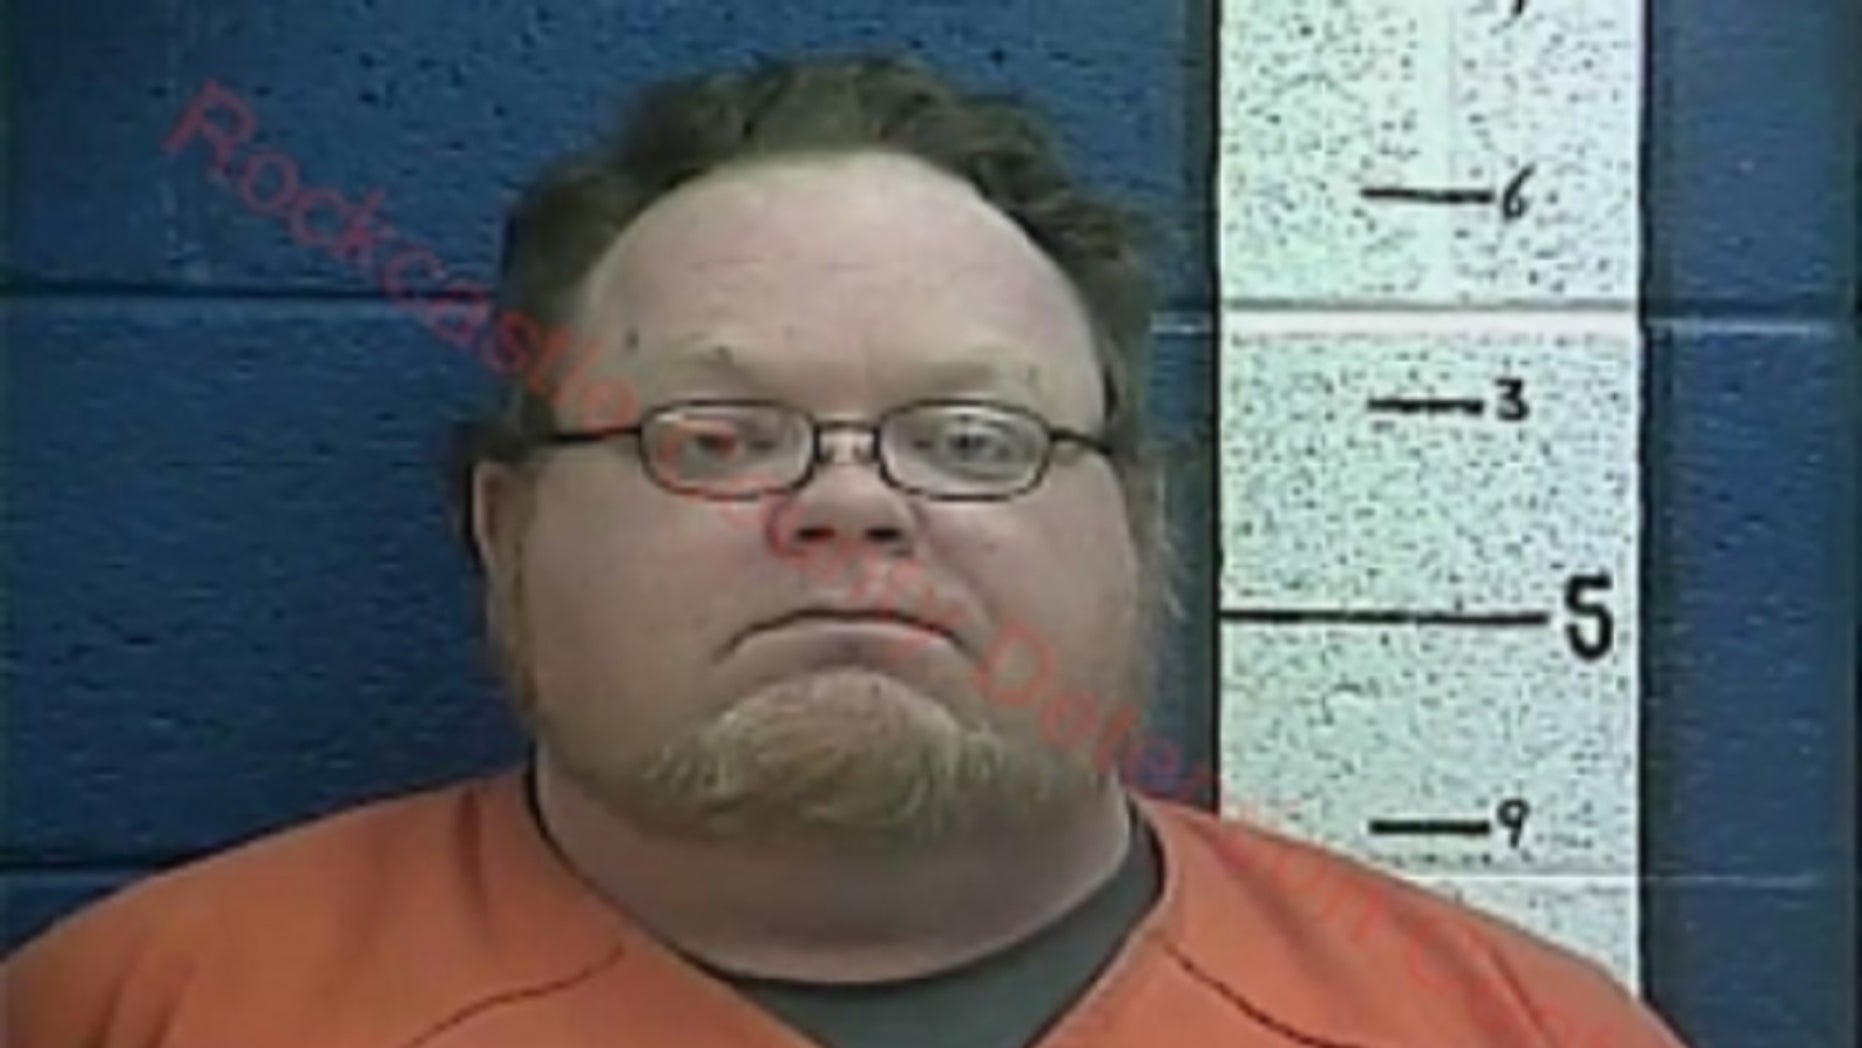 Kentucky dad punished children with pushups for 30 minutes straight: cops